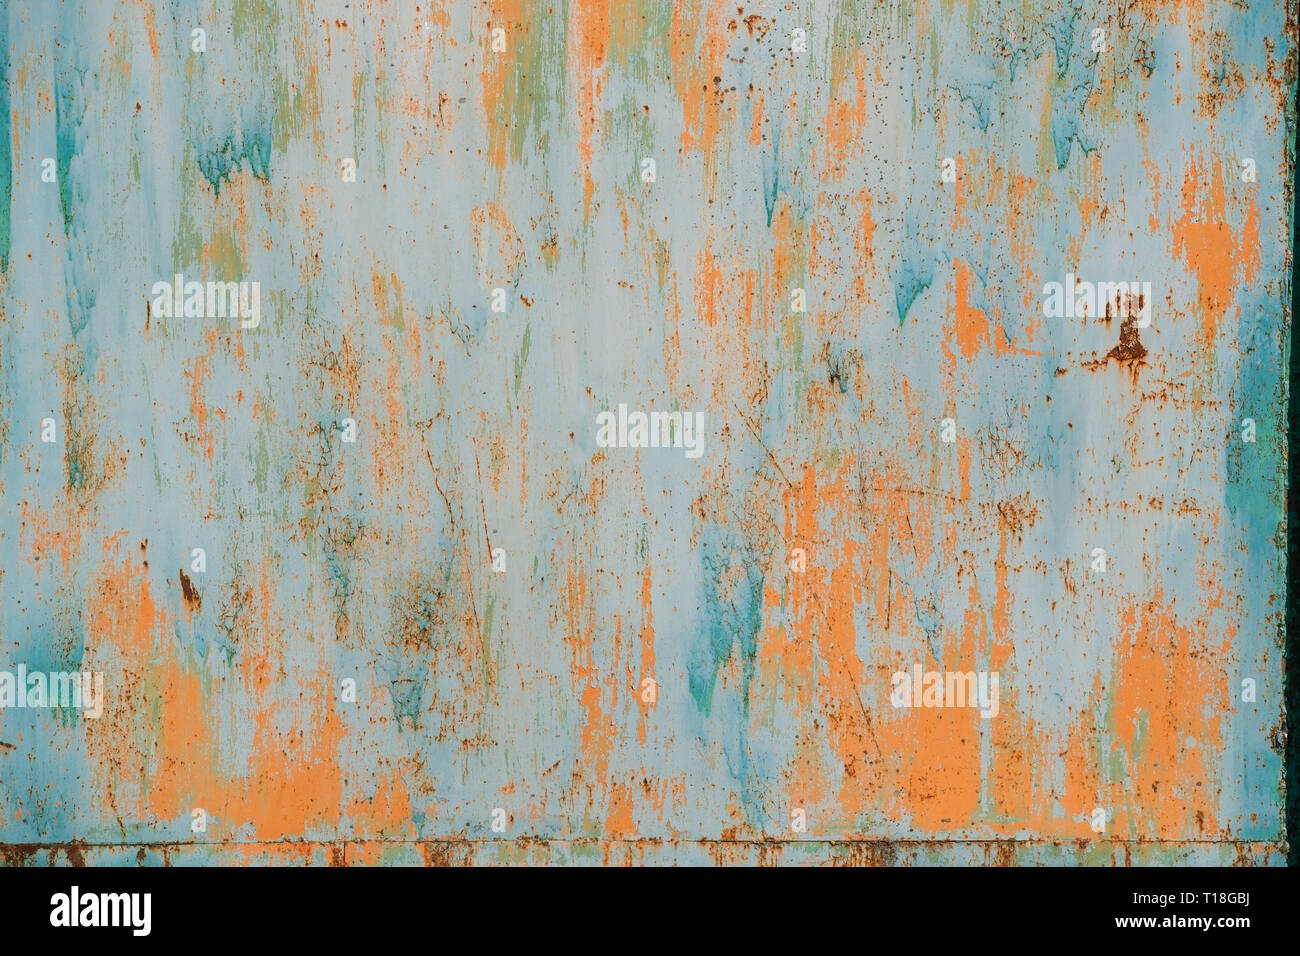 Old Grunge Rusty Metal Metallic Colored Background. Colorful Blue And Orange Abstract Metallic Surface Stock Photo